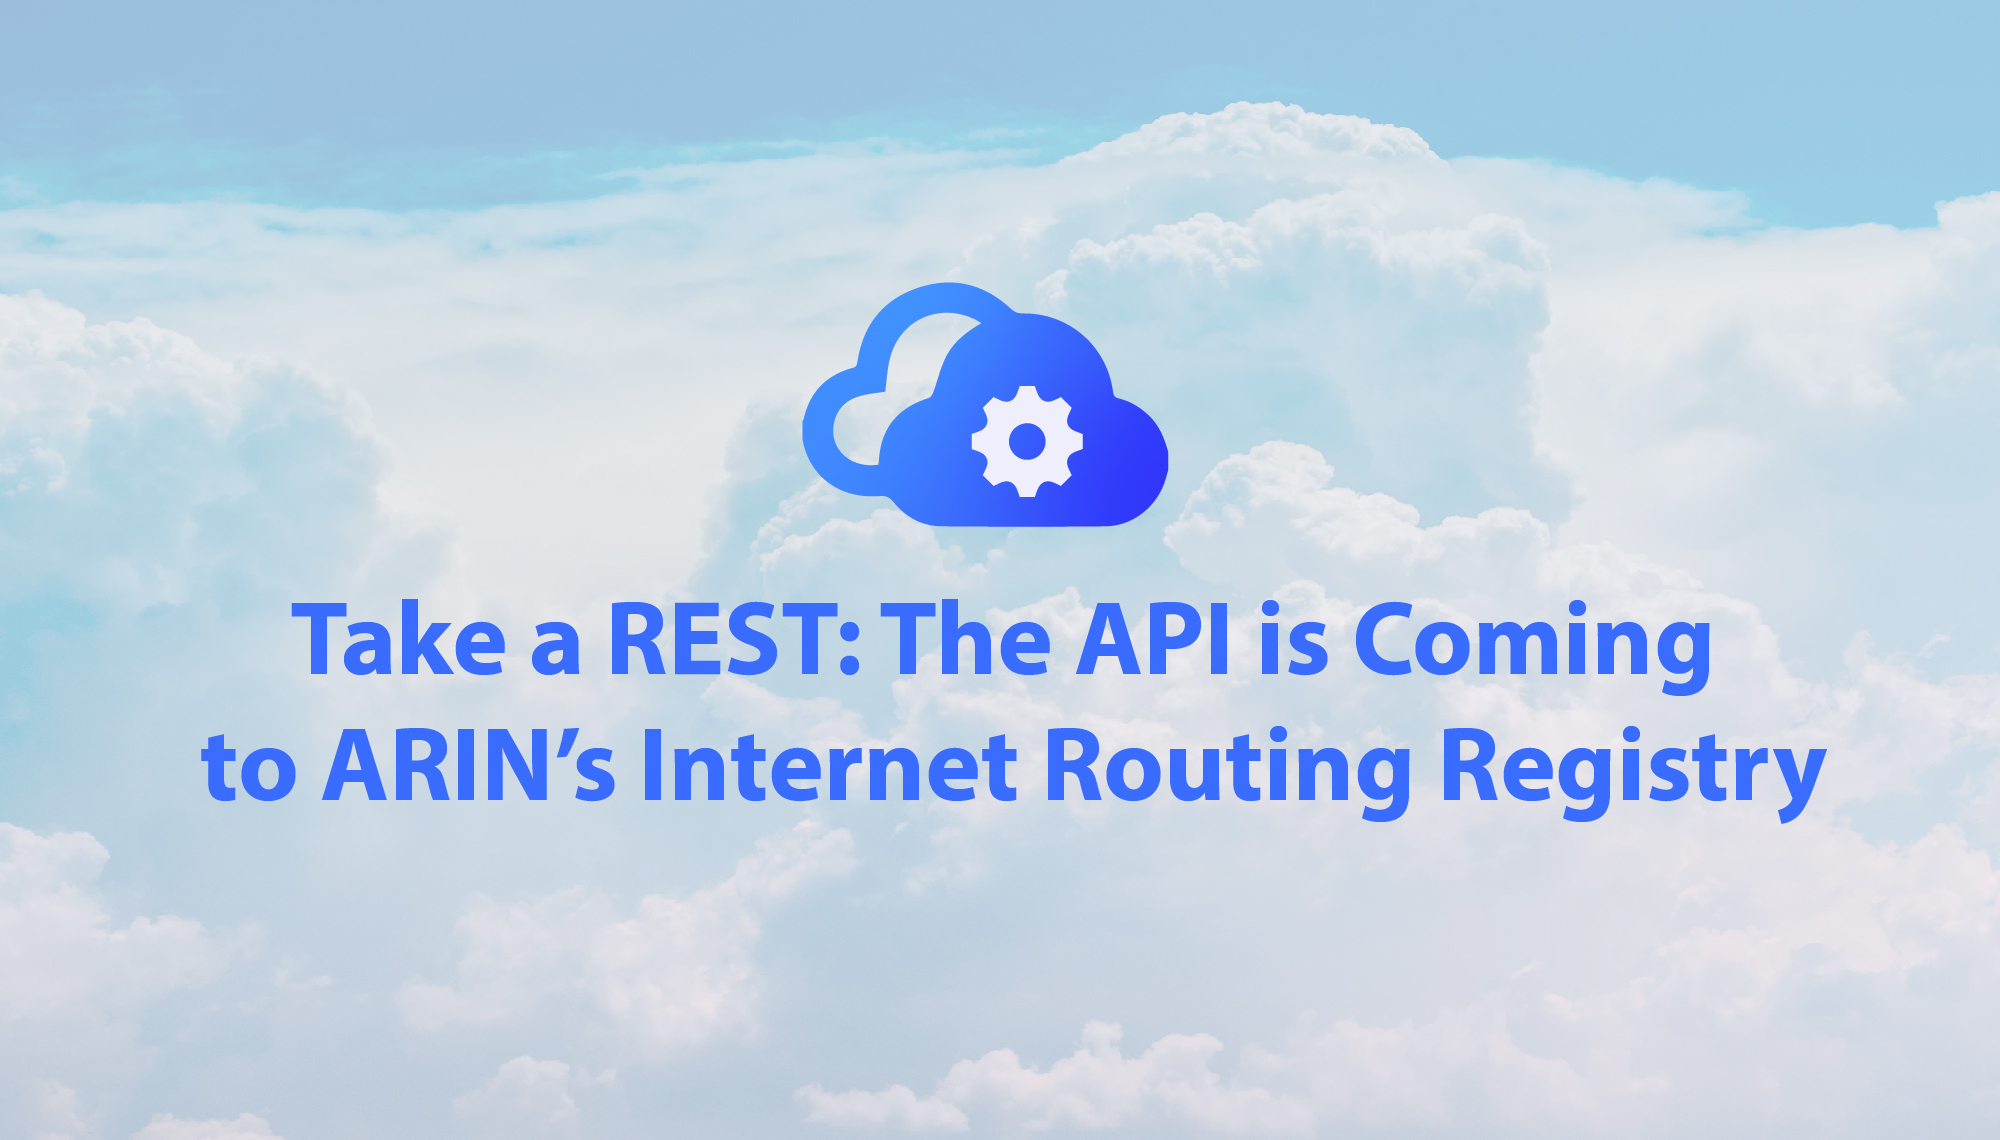 Take a REST: The API is Coming to ARIN’s Internet Routing Registry